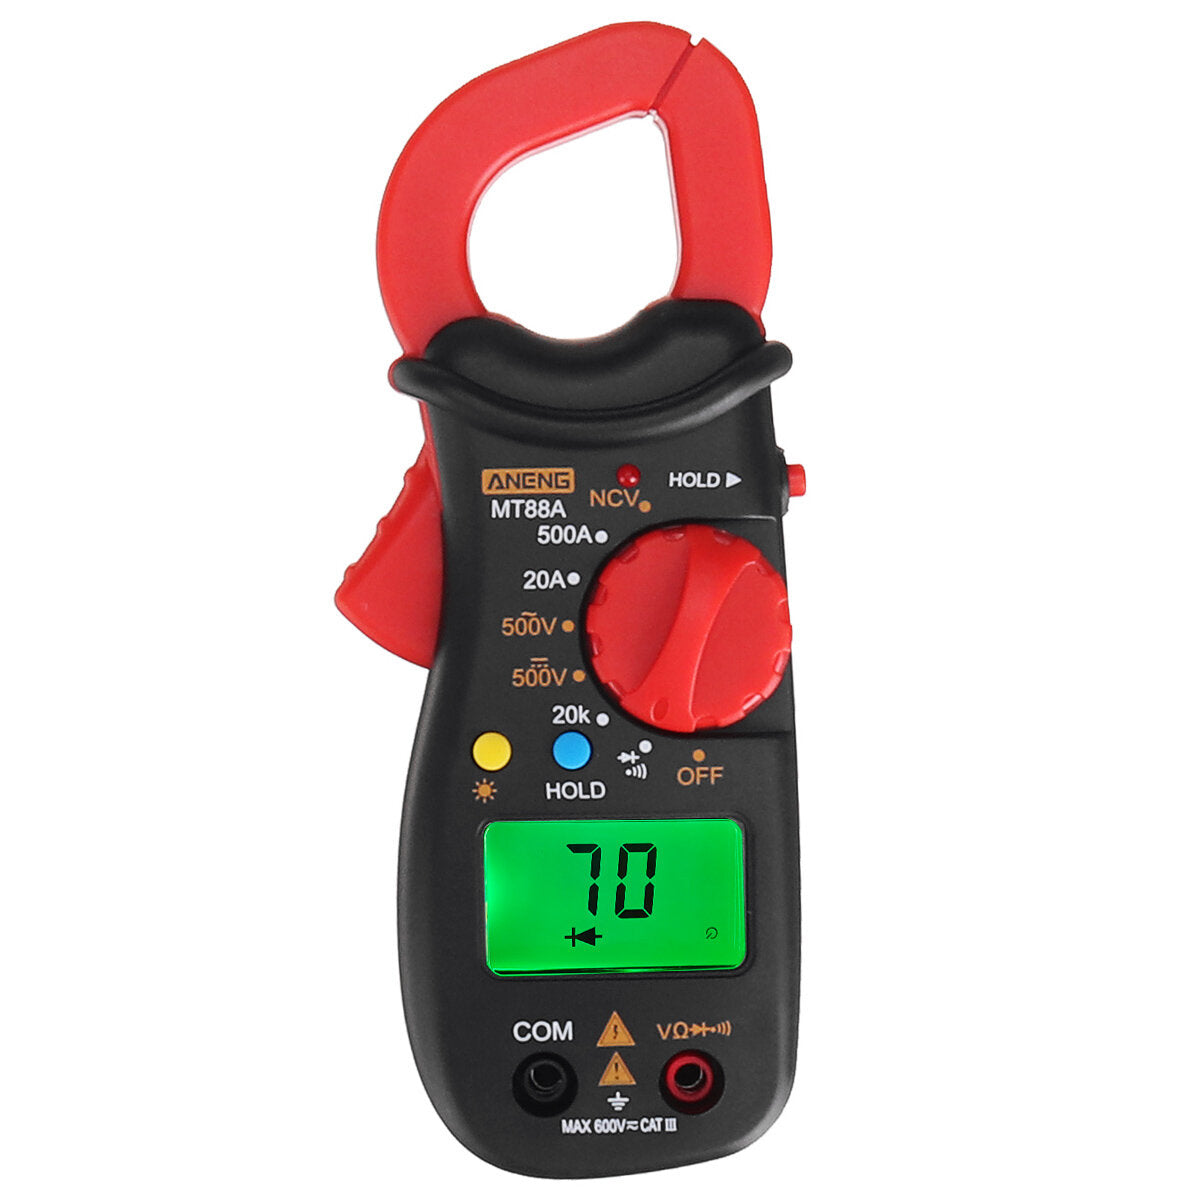 aneng mt88a digitale stroomtang multimeter dc / ac spanning ac huidige tester frequentie capaciteit ncv tester meetinstrument